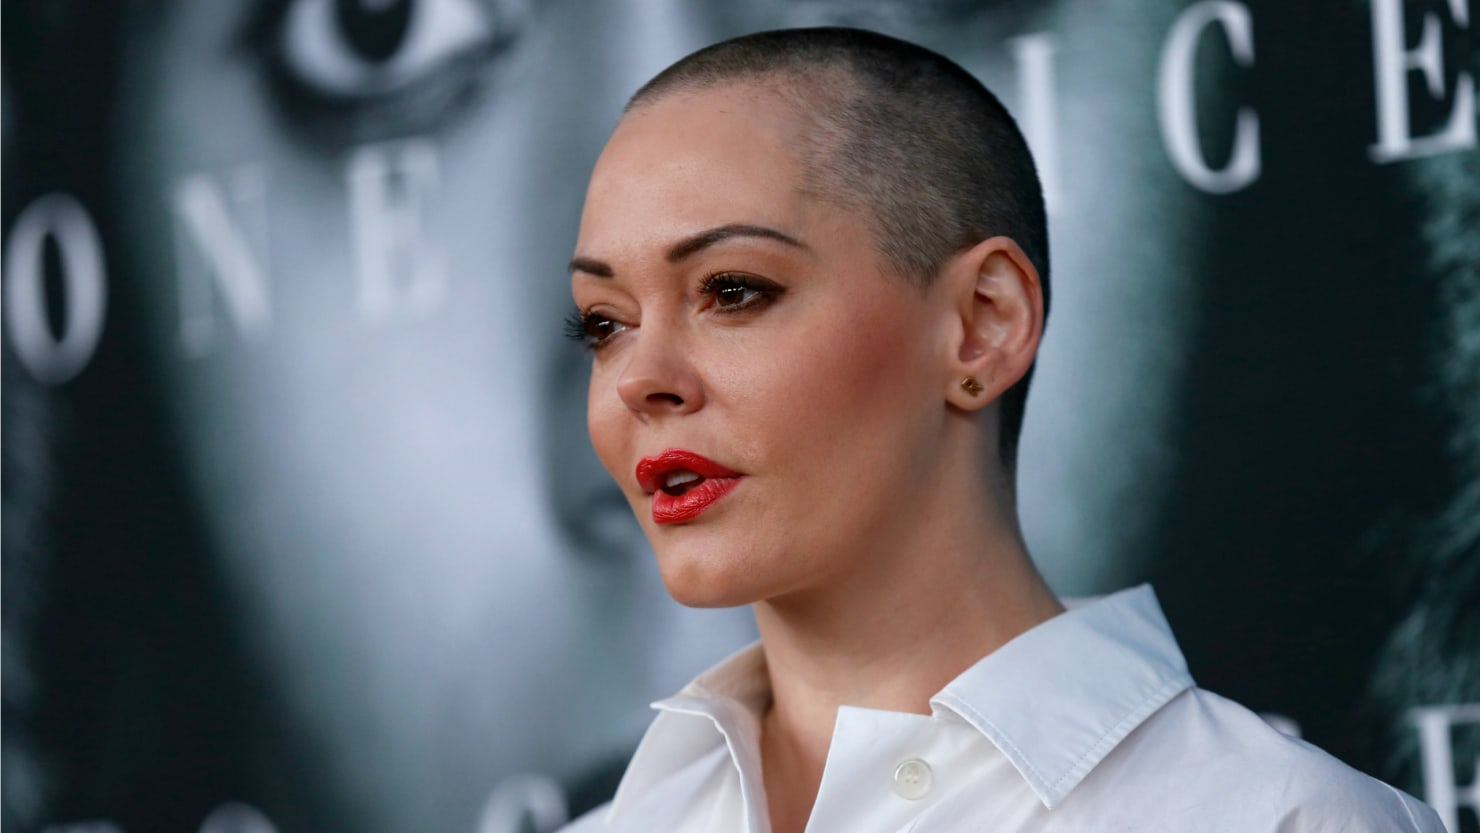 Twitter Suspends Weinstein Victim Rose McGowan for Speaking Out Too Strongly1480 x 833